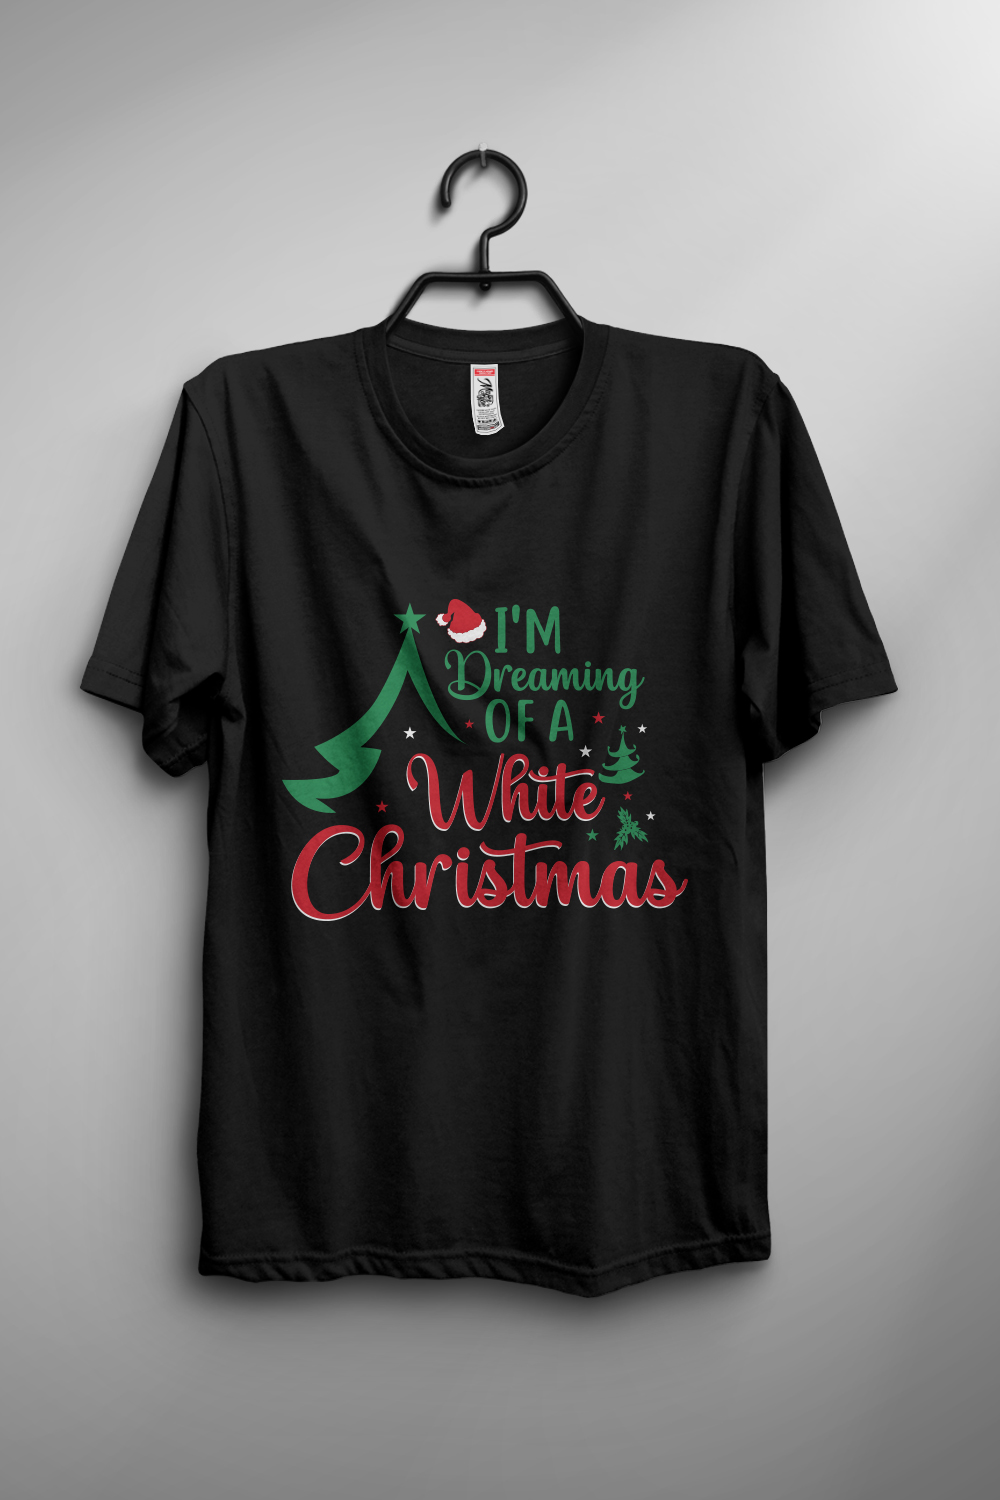 I'm Dreaming of a White Christmas T-shirt design pinterest preview image.